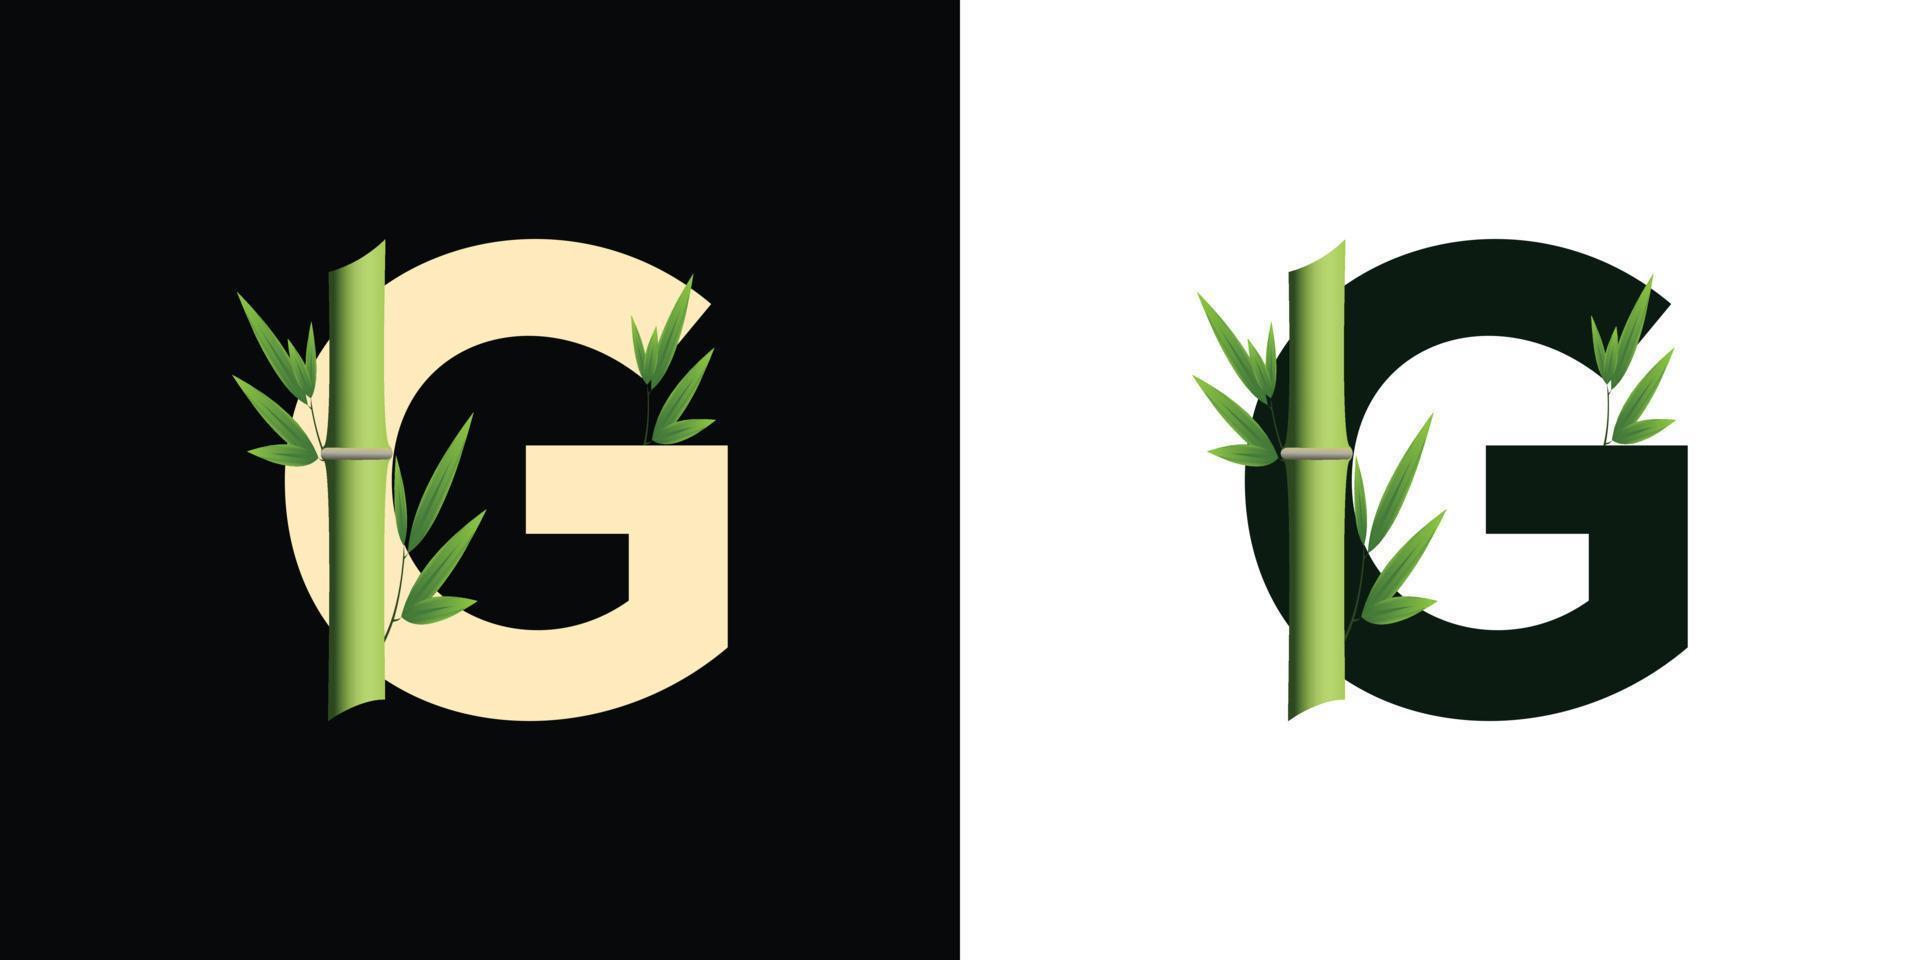 g bamboo logo icon design with template creative initials based lettes vector